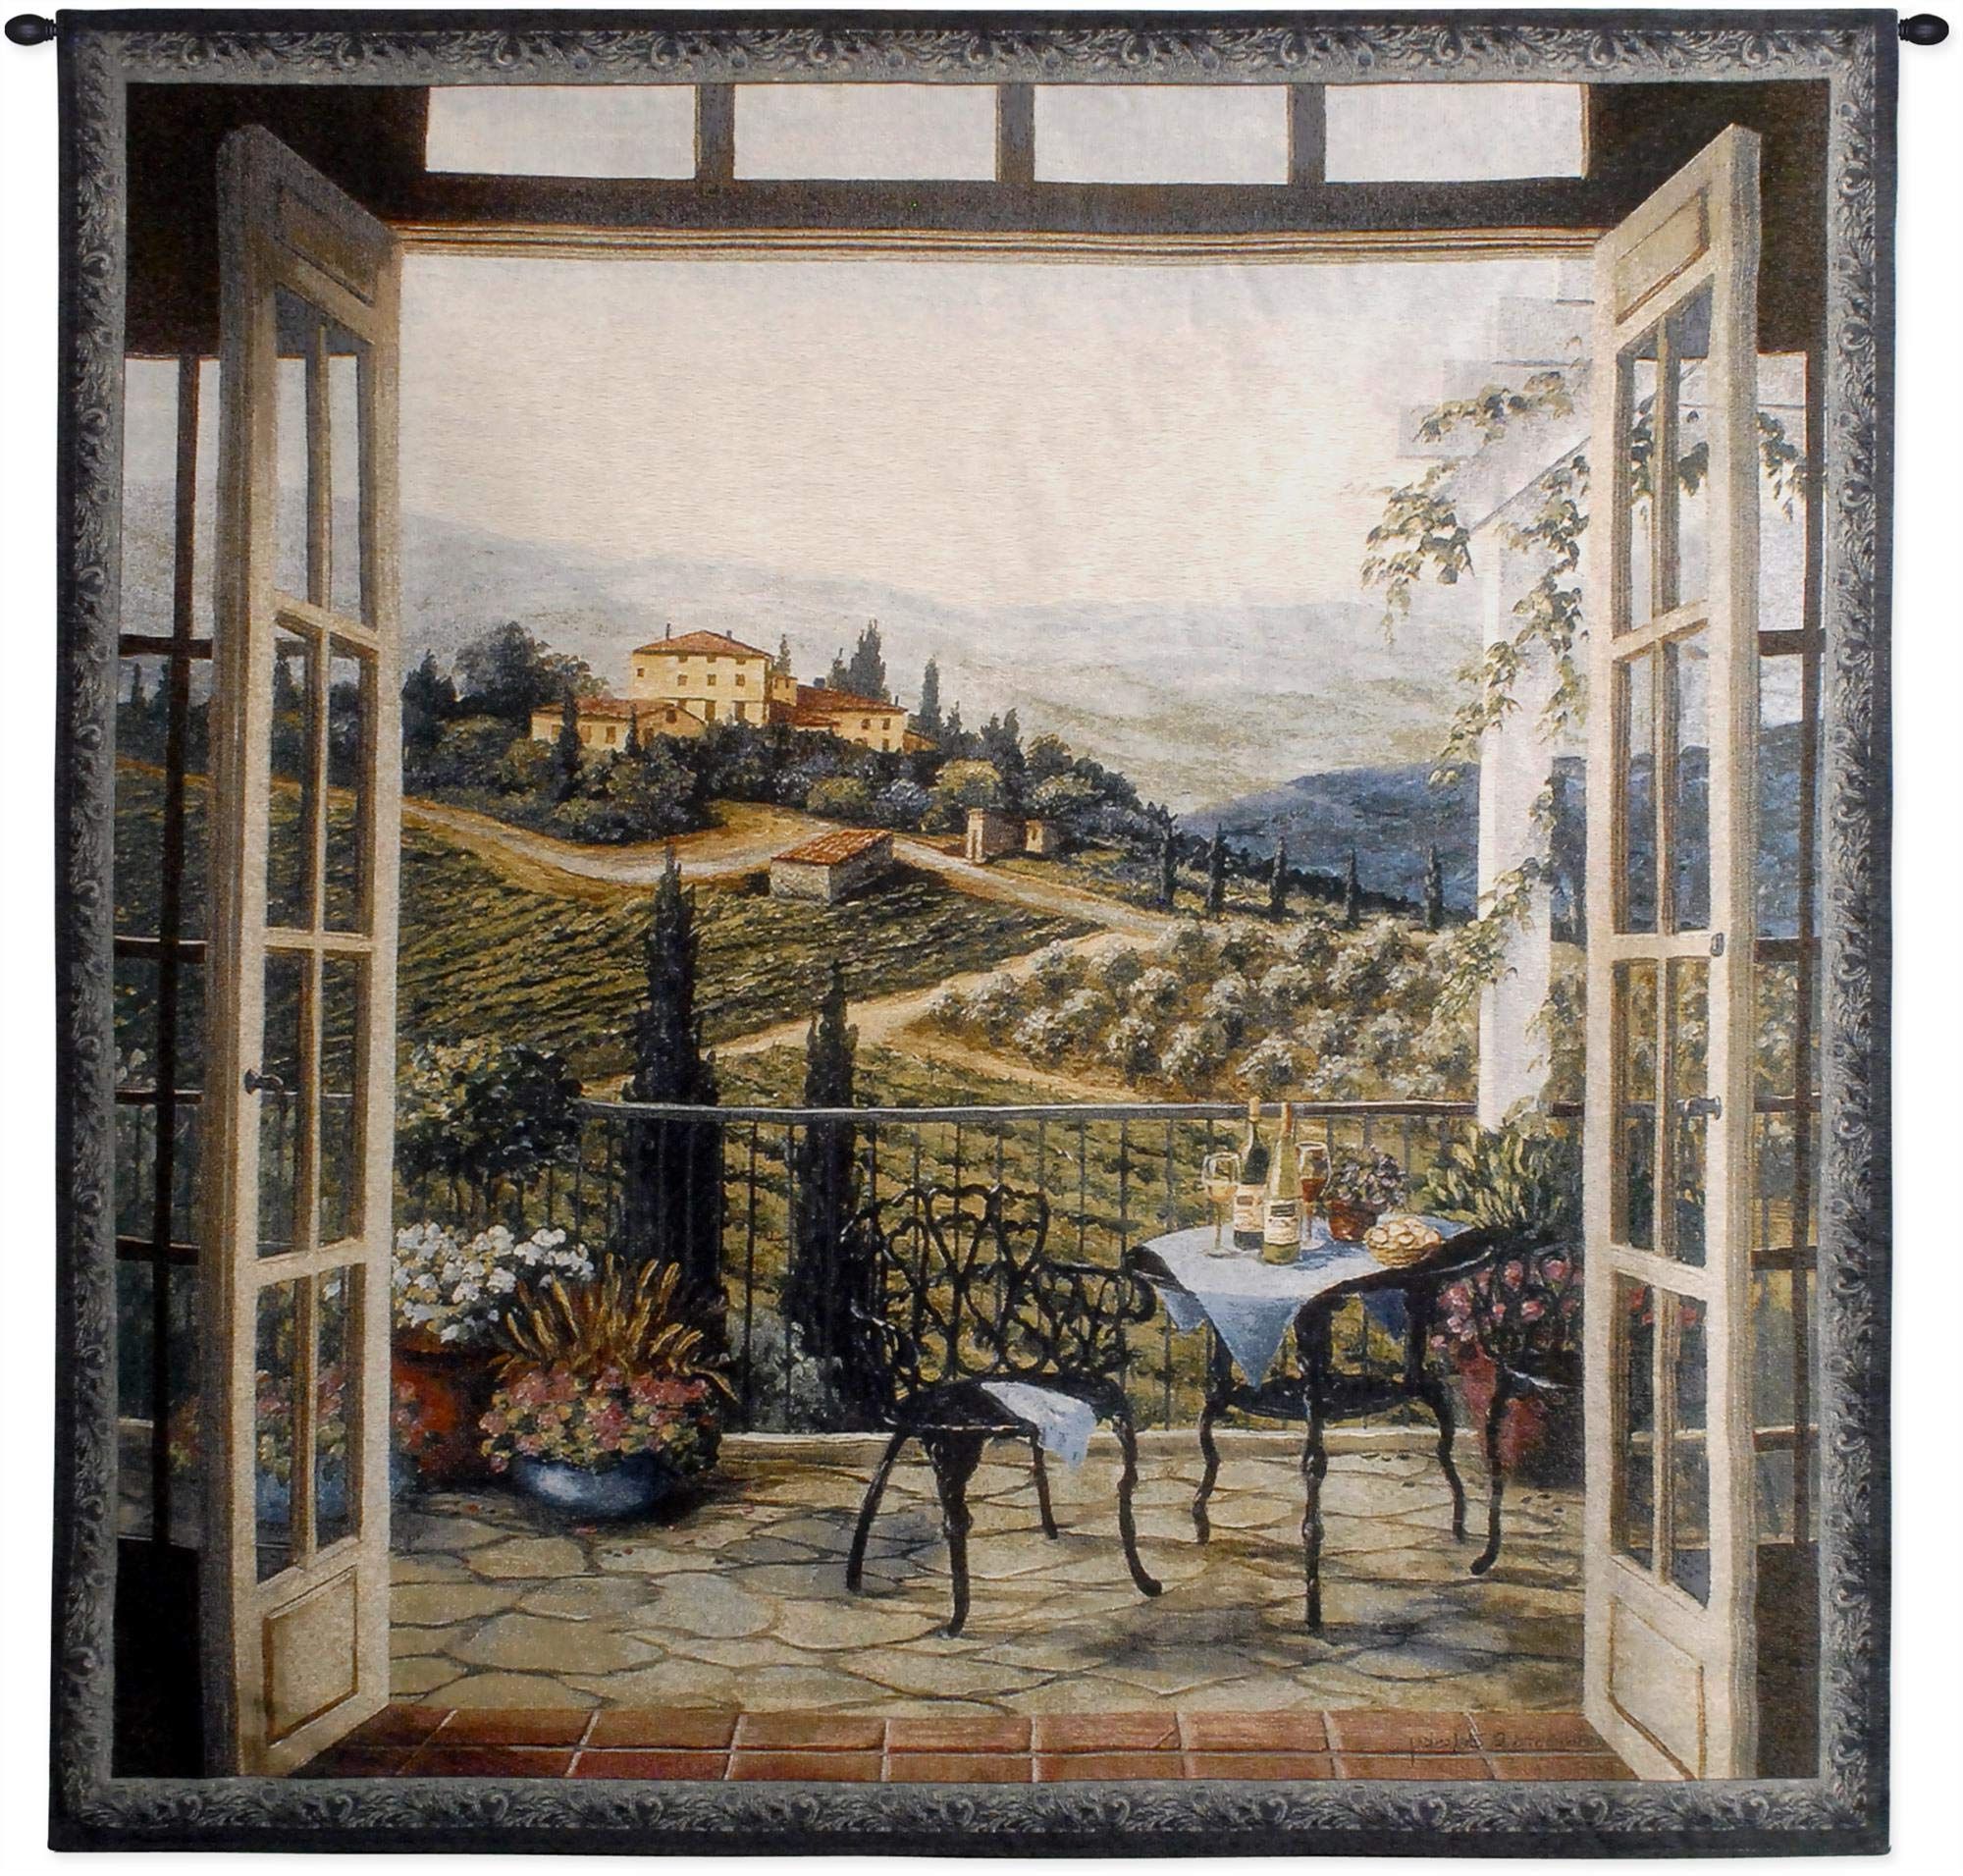 [%amazon: Balcony View Of The Villabarbara Felisky | Woven Tapestry Wall  Art Hanging | Peaceful Countryside Lanscape | 100% Cotton Usa Size 53x53 :  Home & Kitchen Inside Recent Villa View Wall Art|villa View Wall Art For Most Popular Amazon: Balcony View Of The Villabarbara Felisky | Woven Tapestry Wall  Art Hanging | Peaceful Countryside Lanscape | 100% Cotton Usa Size 53x53 :  Home & Kitchen|most Up To Date Villa View Wall Art Intended For Amazon: Balcony View Of The Villabarbara Felisky | Woven Tapestry Wall  Art Hanging | Peaceful Countryside Lanscape | 100% Cotton Usa Size 53x53 :  Home & Kitchen|trendy Amazon: Balcony View Of The Villabarbara Felisky | Woven Tapestry Wall  Art Hanging | Peaceful Countryside Lanscape | 100% Cotton Usa Size 53x53 :  Home & Kitchen With Villa View Wall Art%] (Photo 1 of 15)